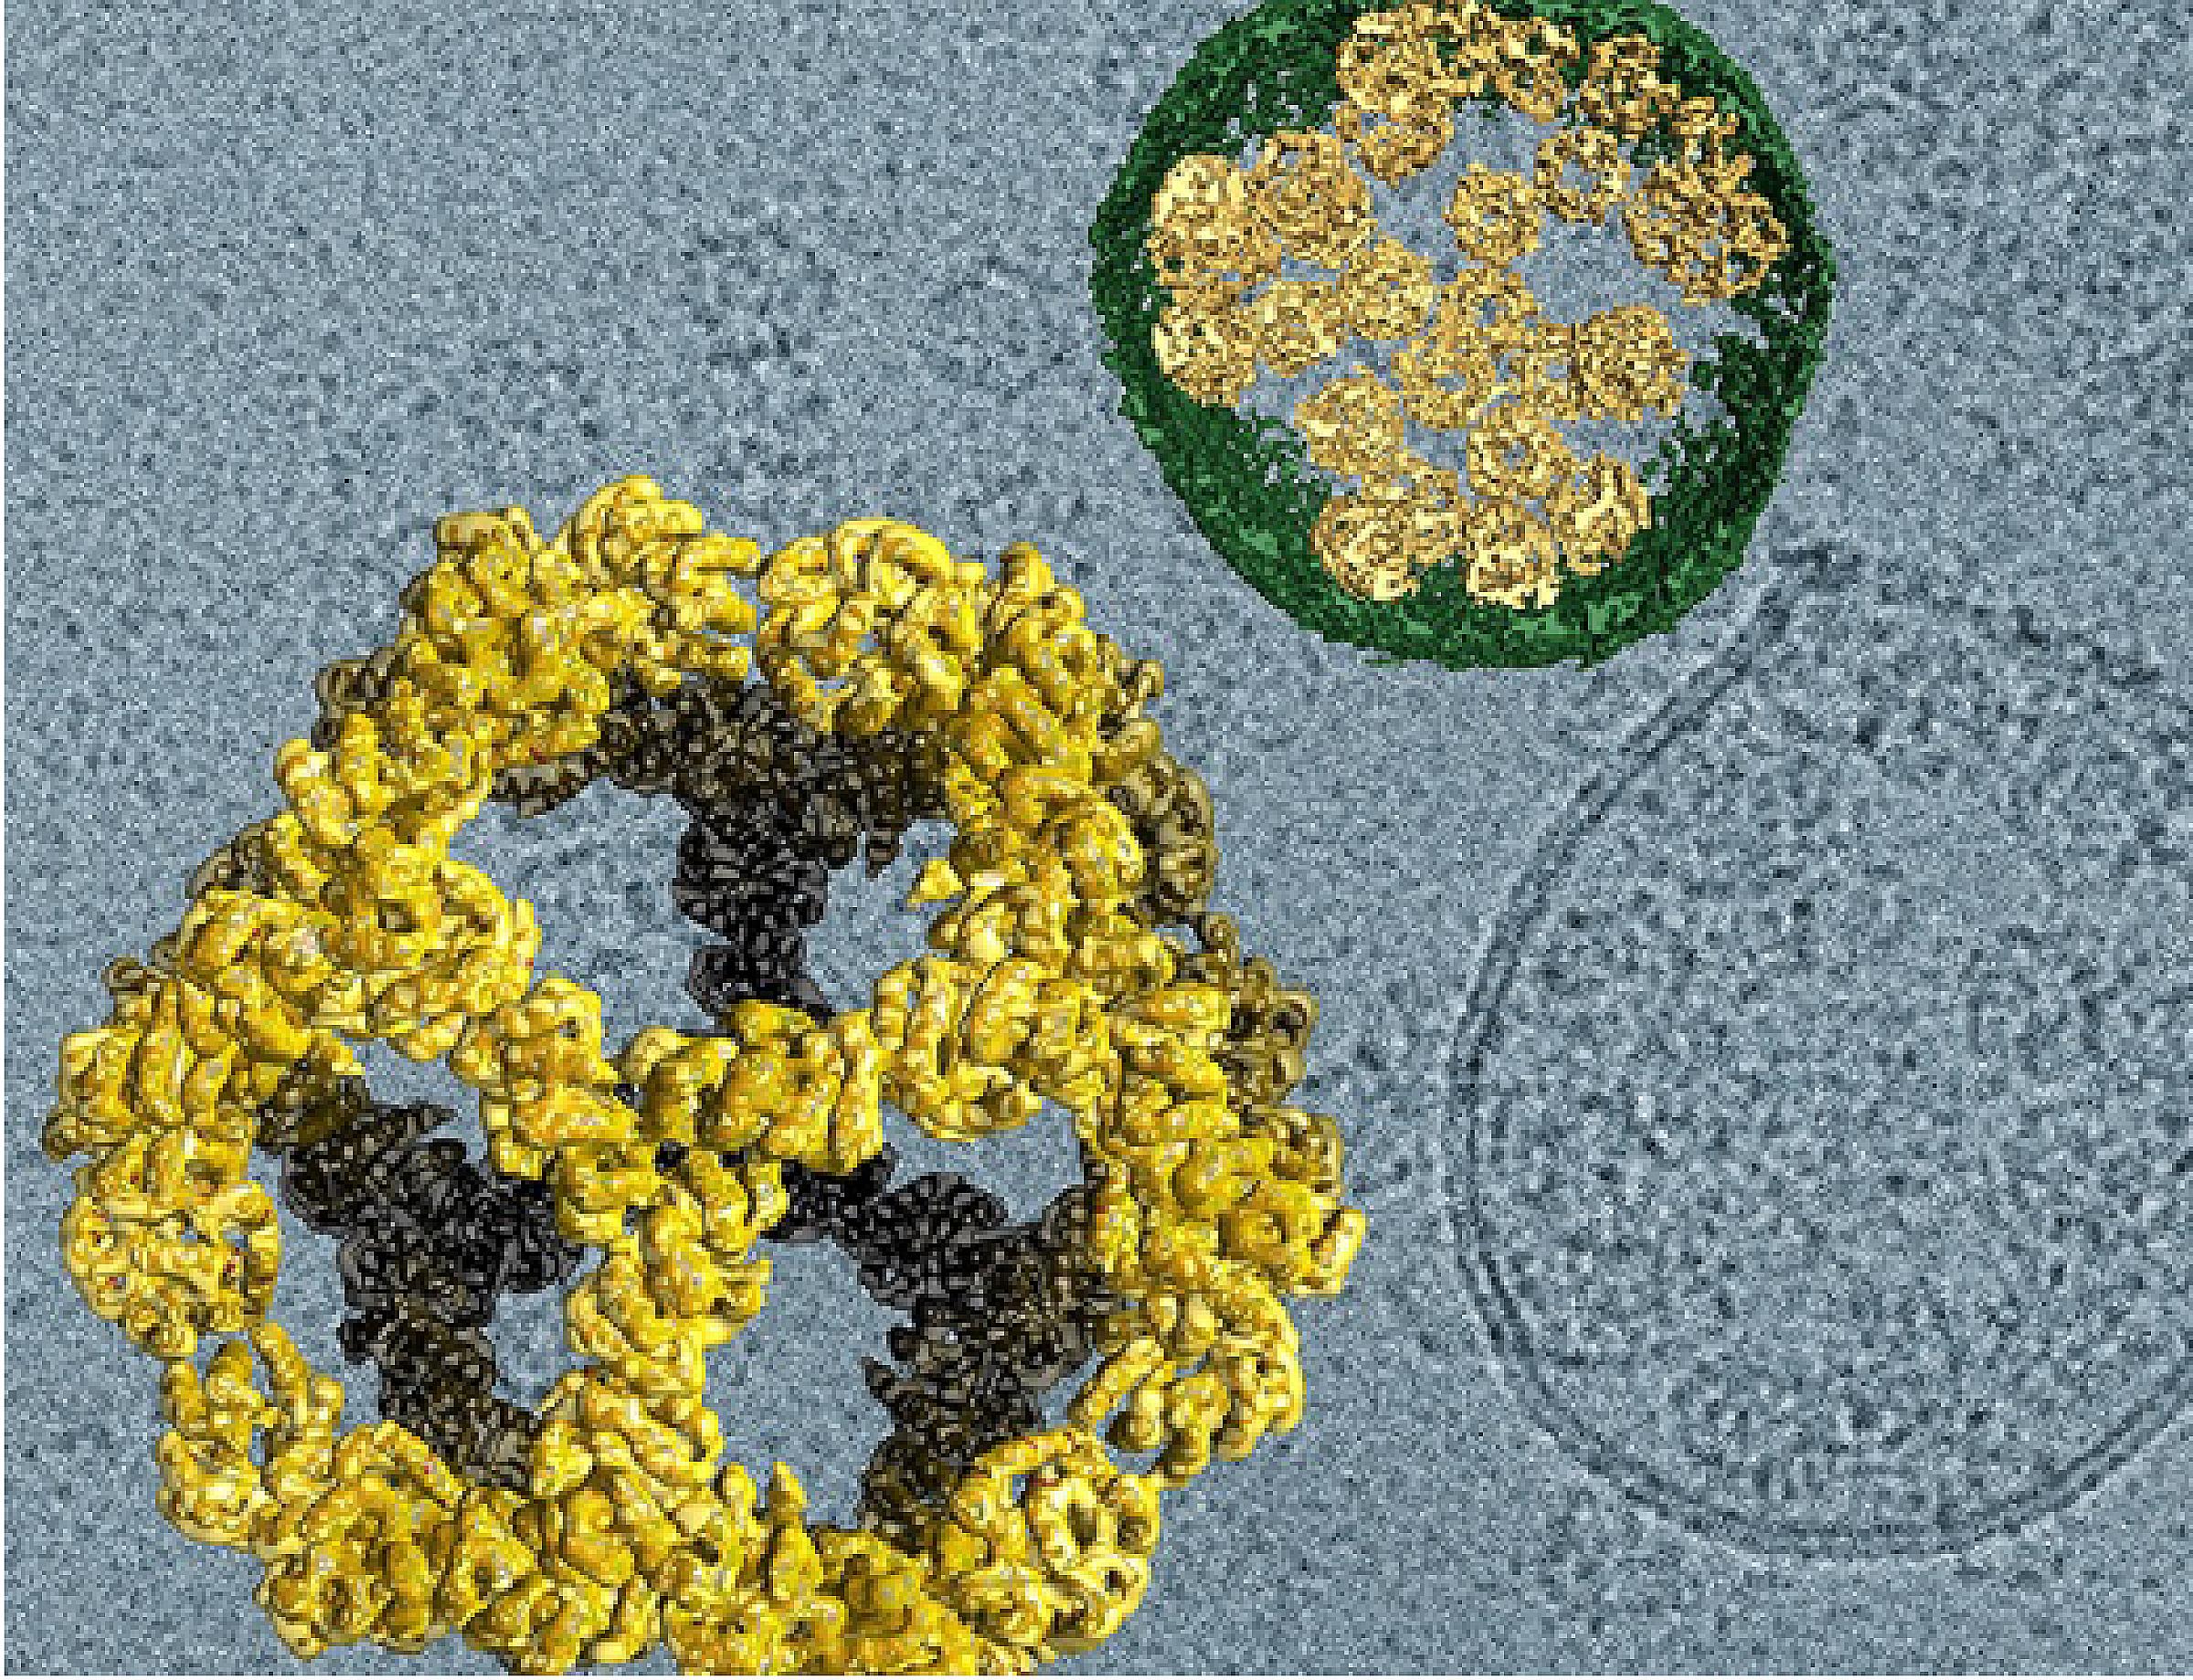 Designed protein nanocages released within membrane vesicles.